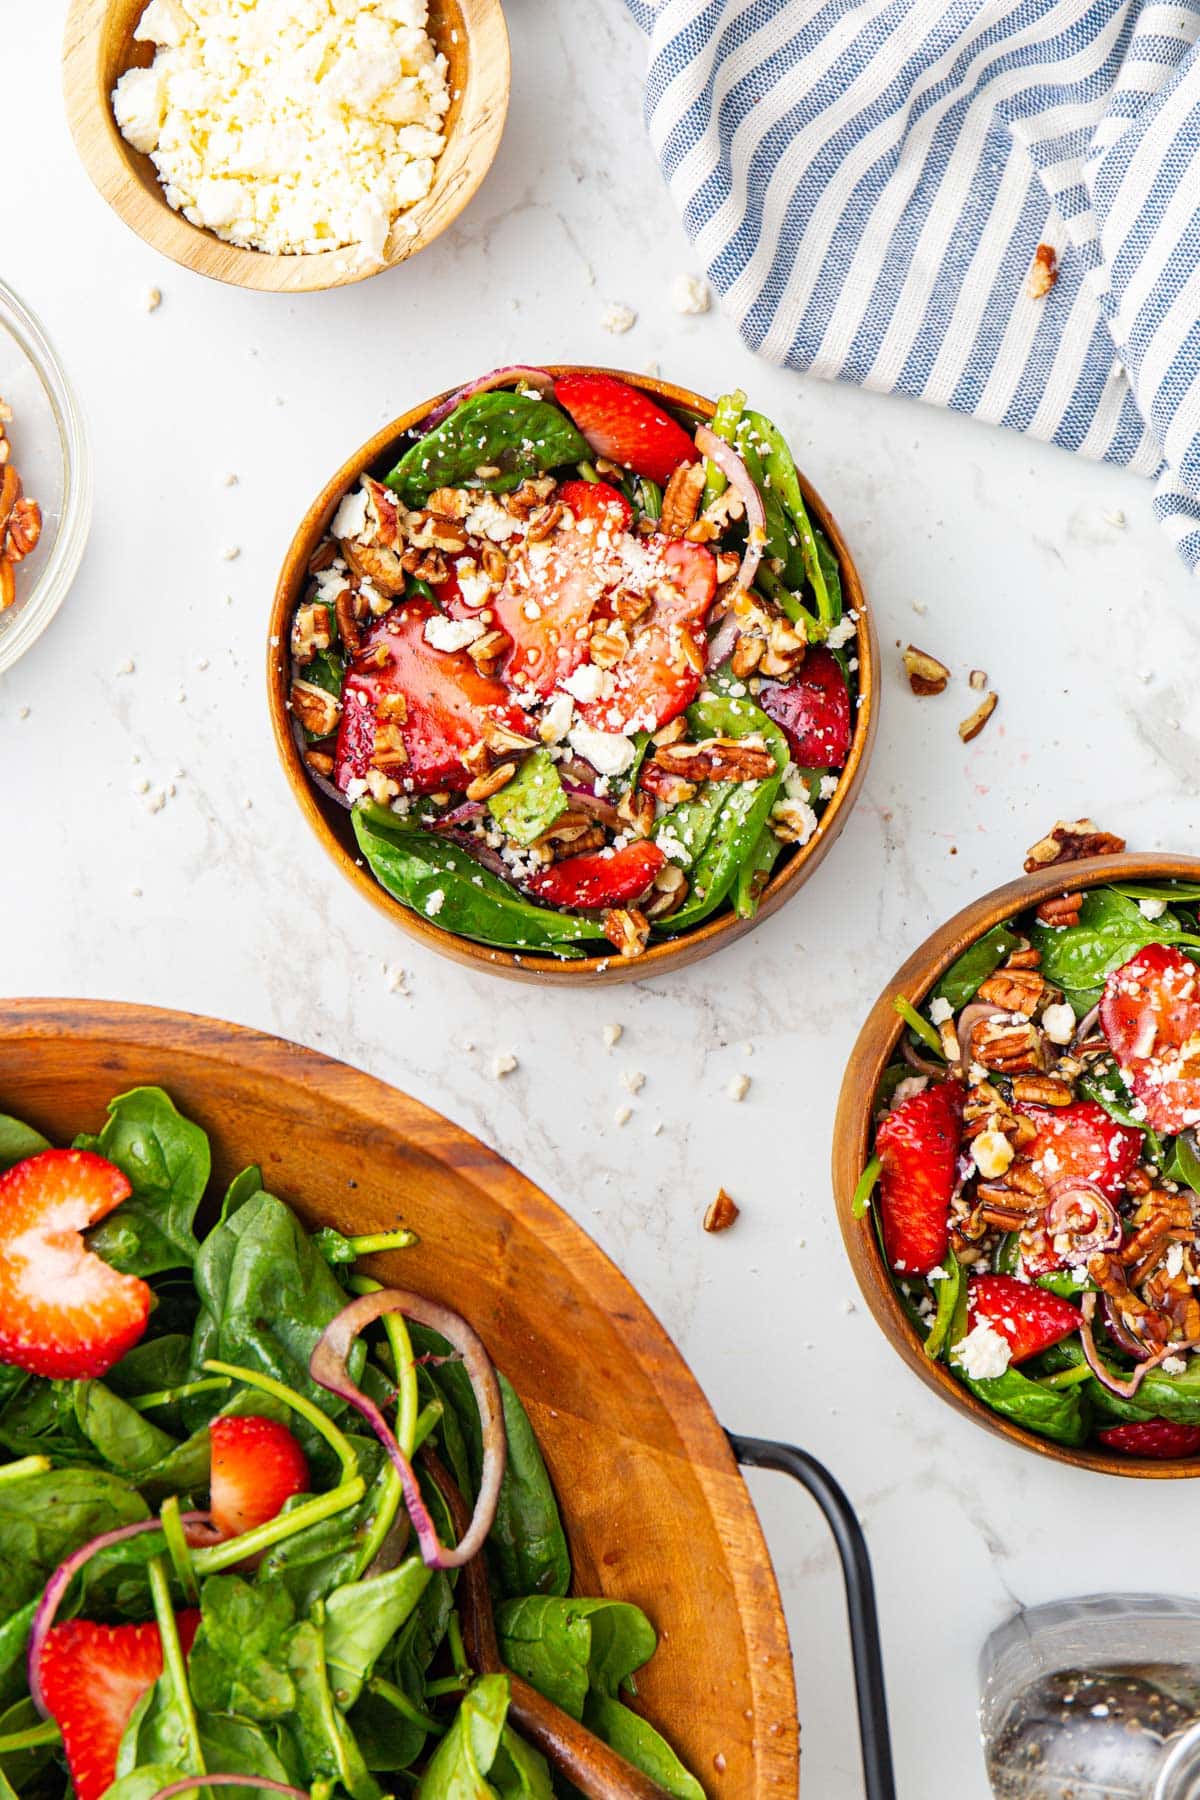 Spinach strawberry salad in two wooden bowls topped with feta cheese and pecans.